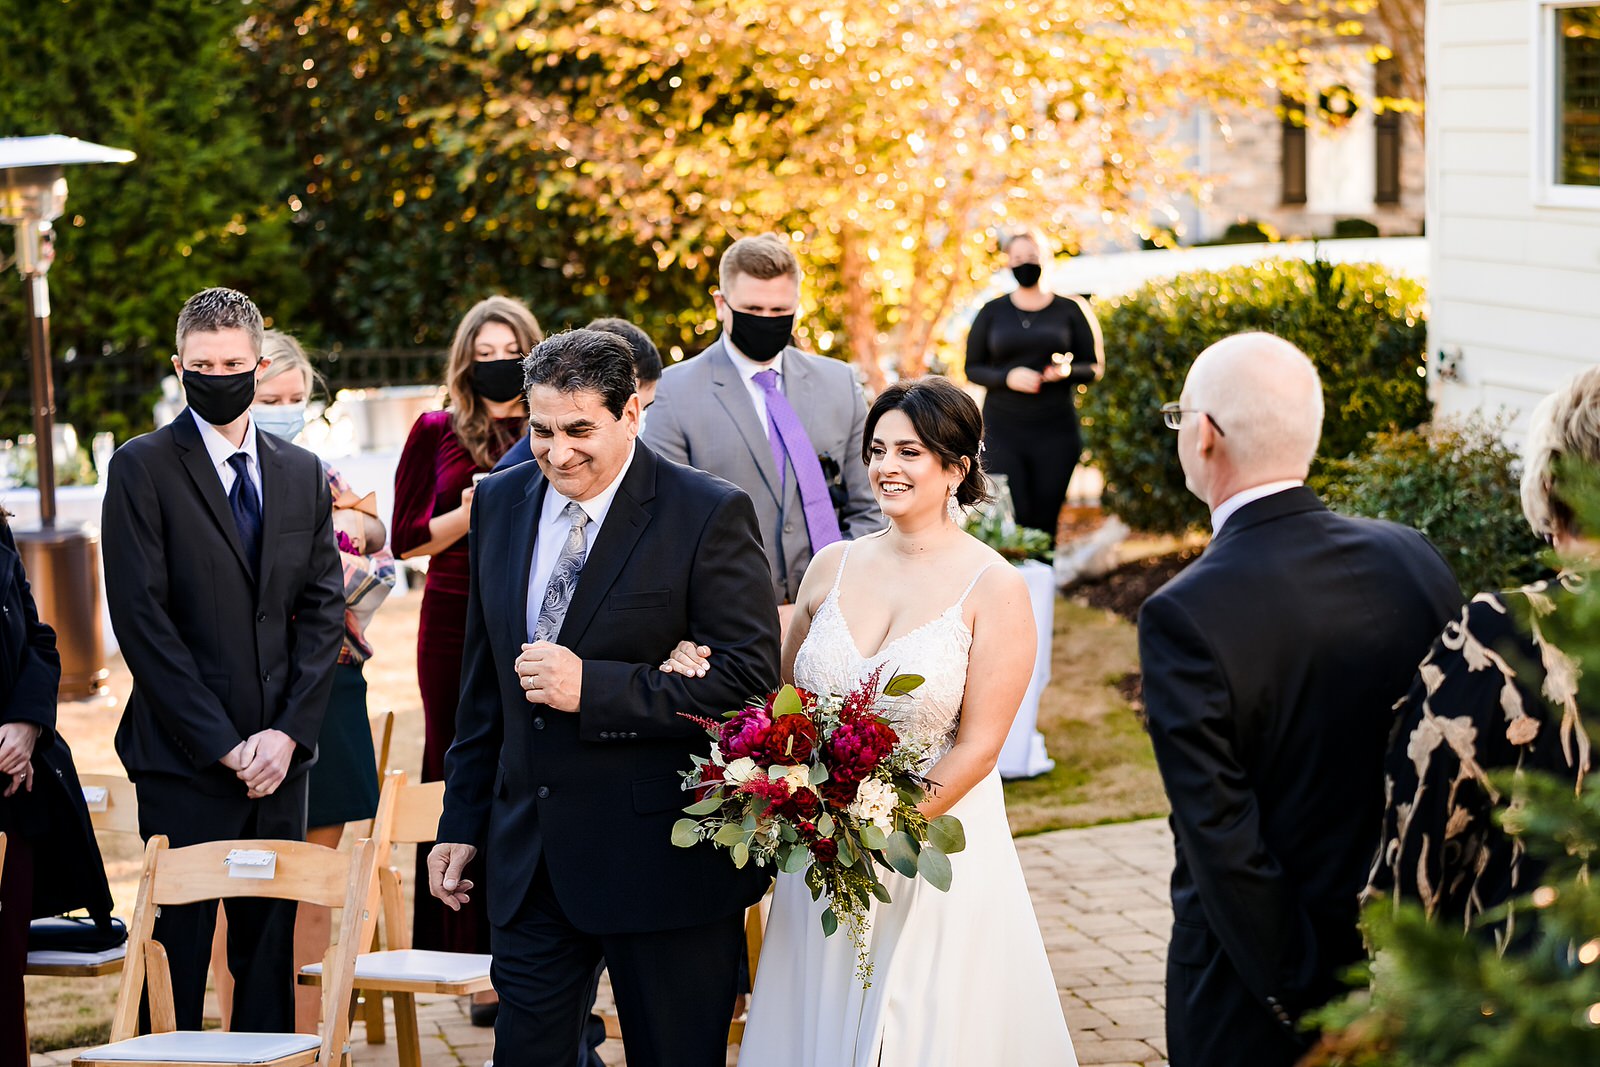 Don't you just love the groom's reaction to seeing the bride? And hers too!